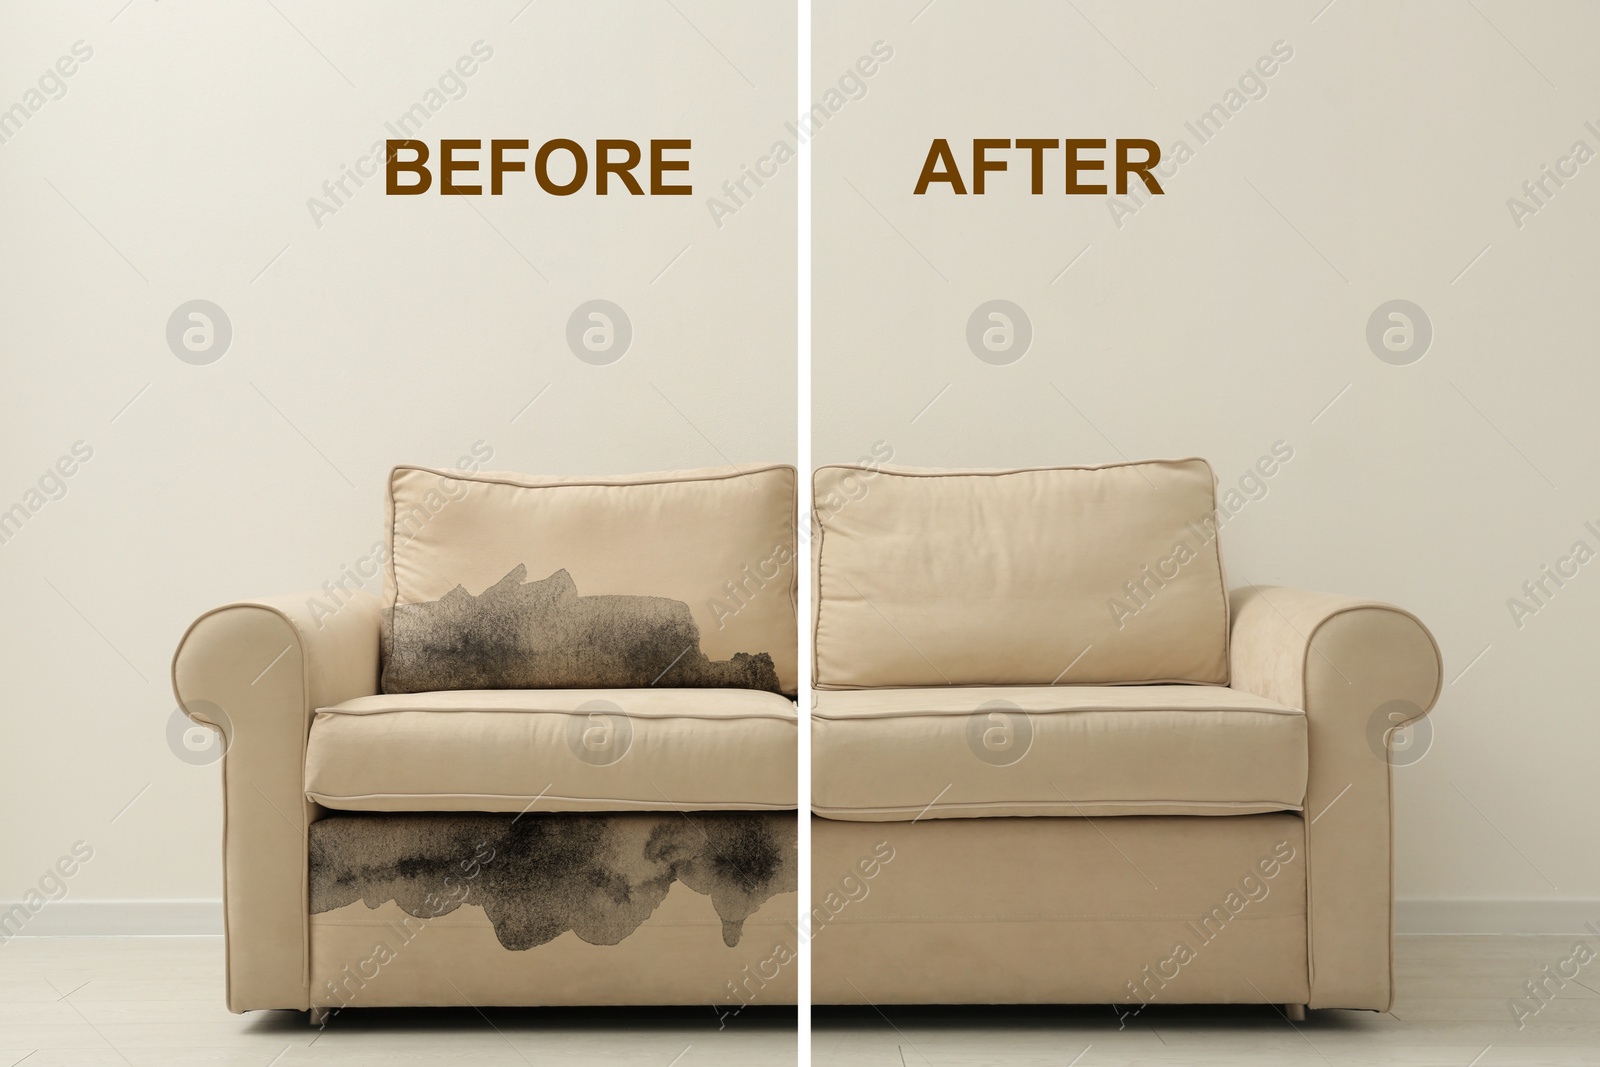 Image of Sofa before and after dry-cleaning indoors, collage